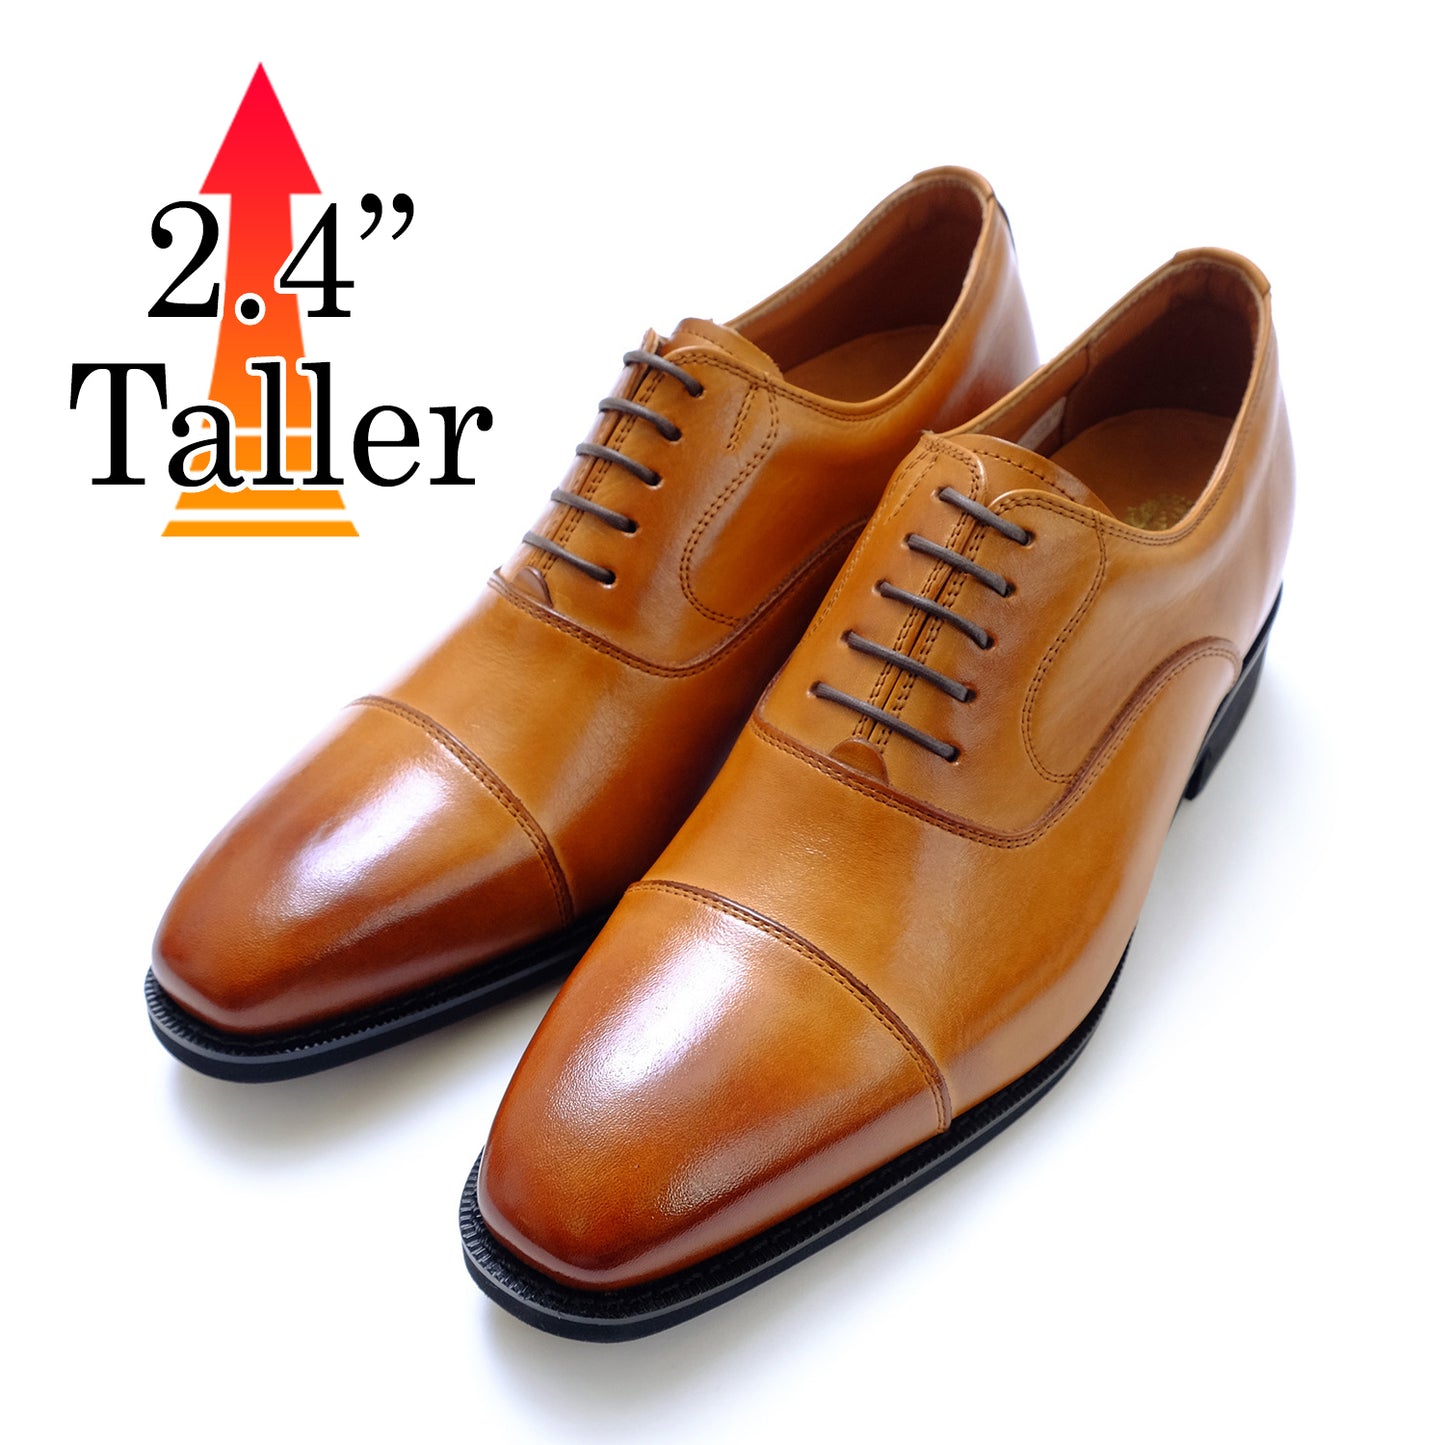 Men's Height Increasing Elevator Shoes 2.36" Taller Oxford Cap Toe Lace Up Dress Shoes Genuine Leather No. 1301